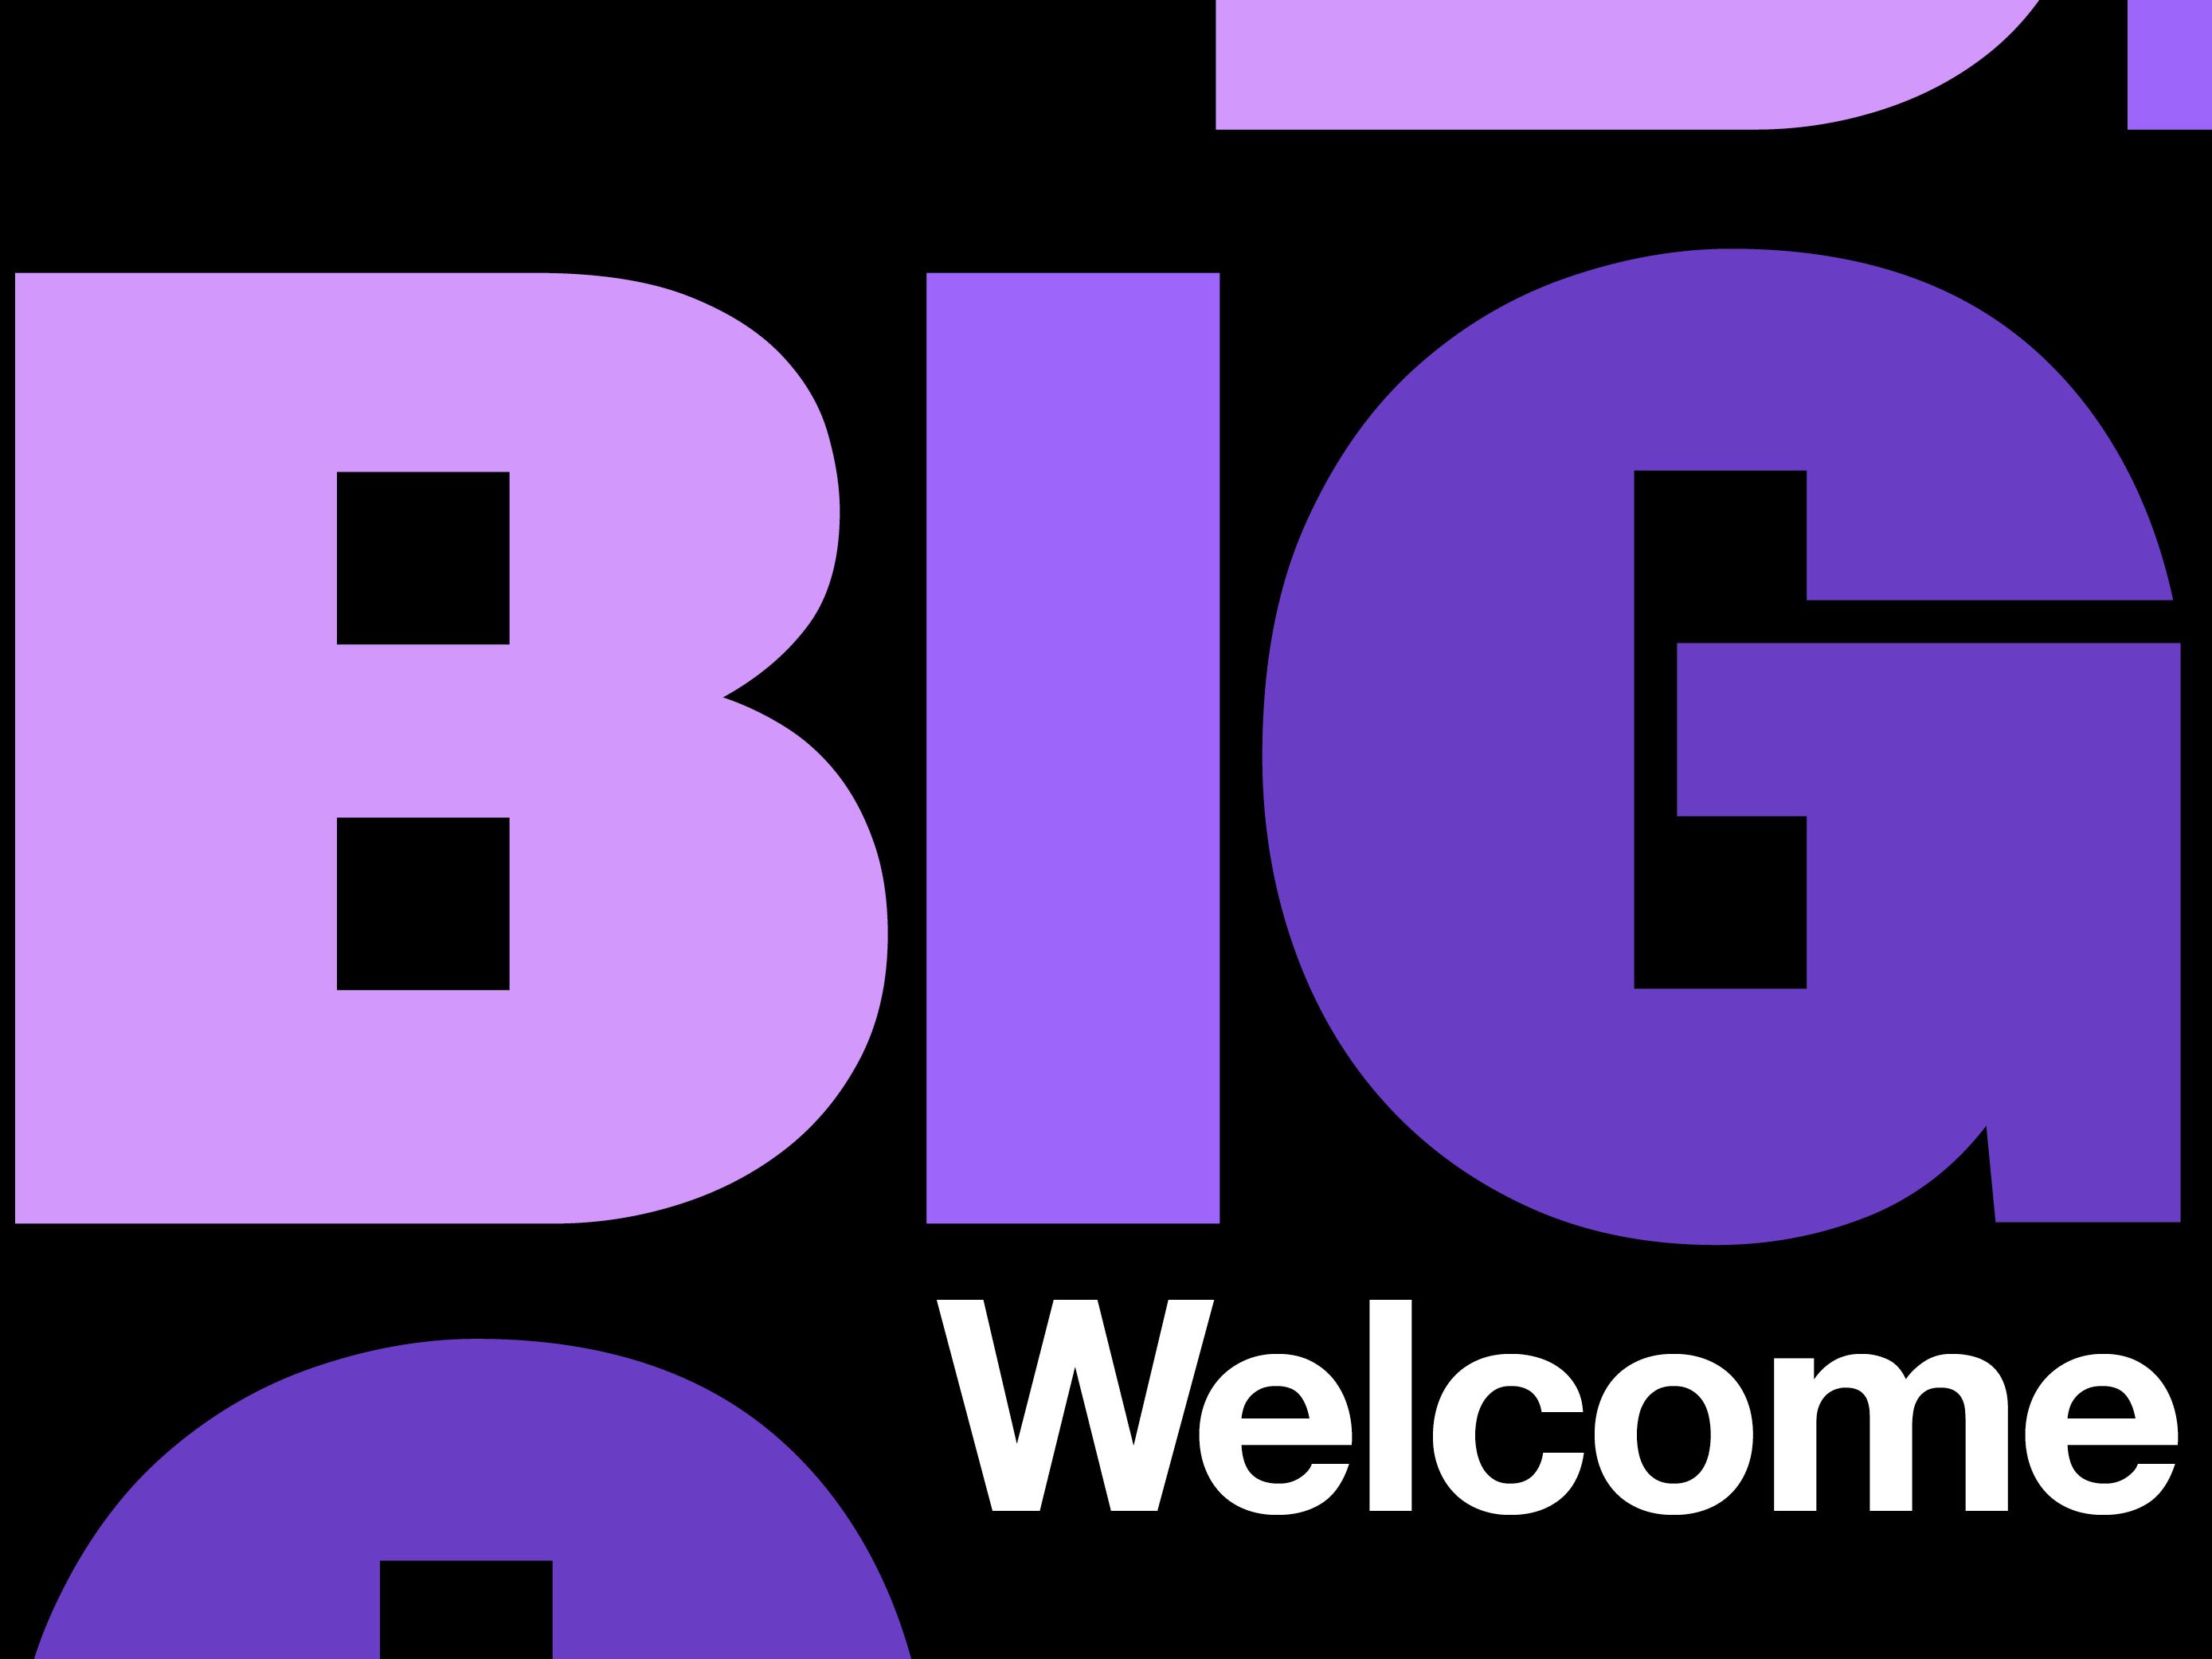 The words 'Big Welcome', with 'big' in large capital letters in different shades of purple